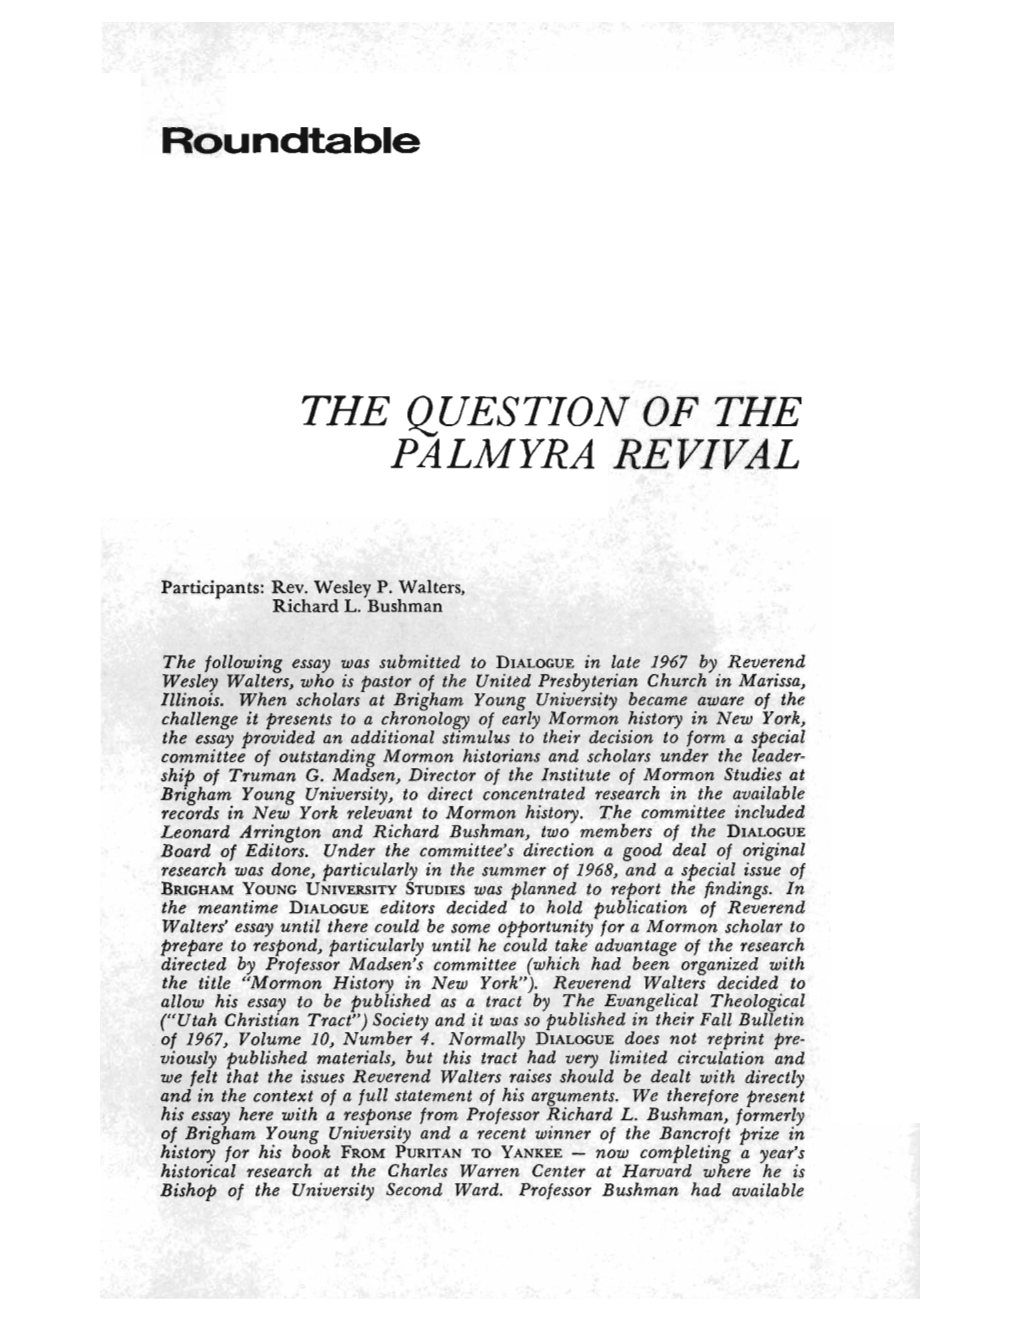 The Question of the Palmyra Revival